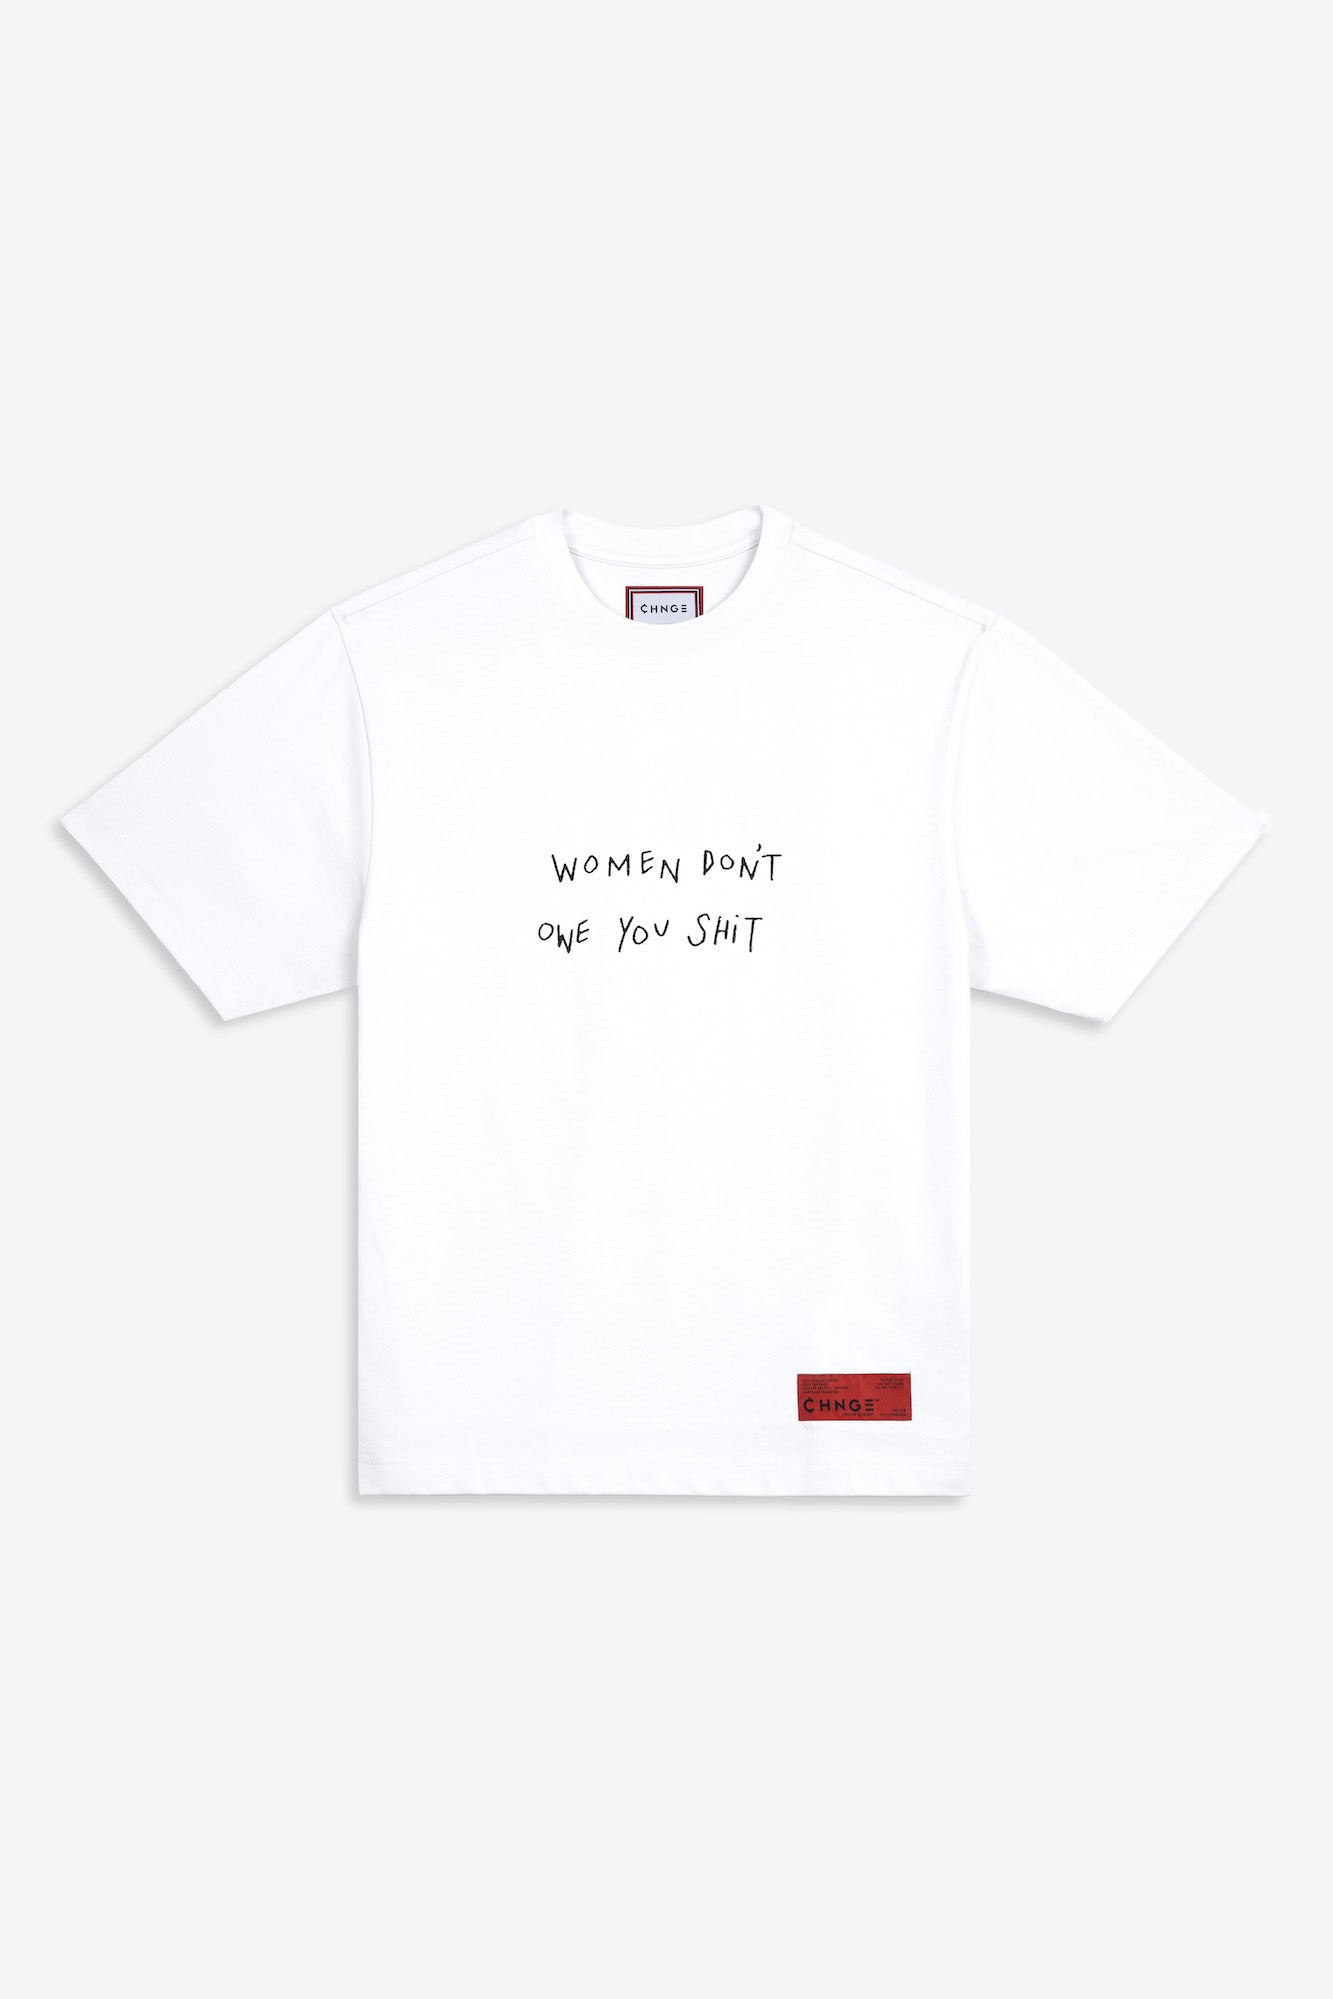 What is meaning XS, S, M, L, XL, XXL, 3XL, 4XL Clothes Size in